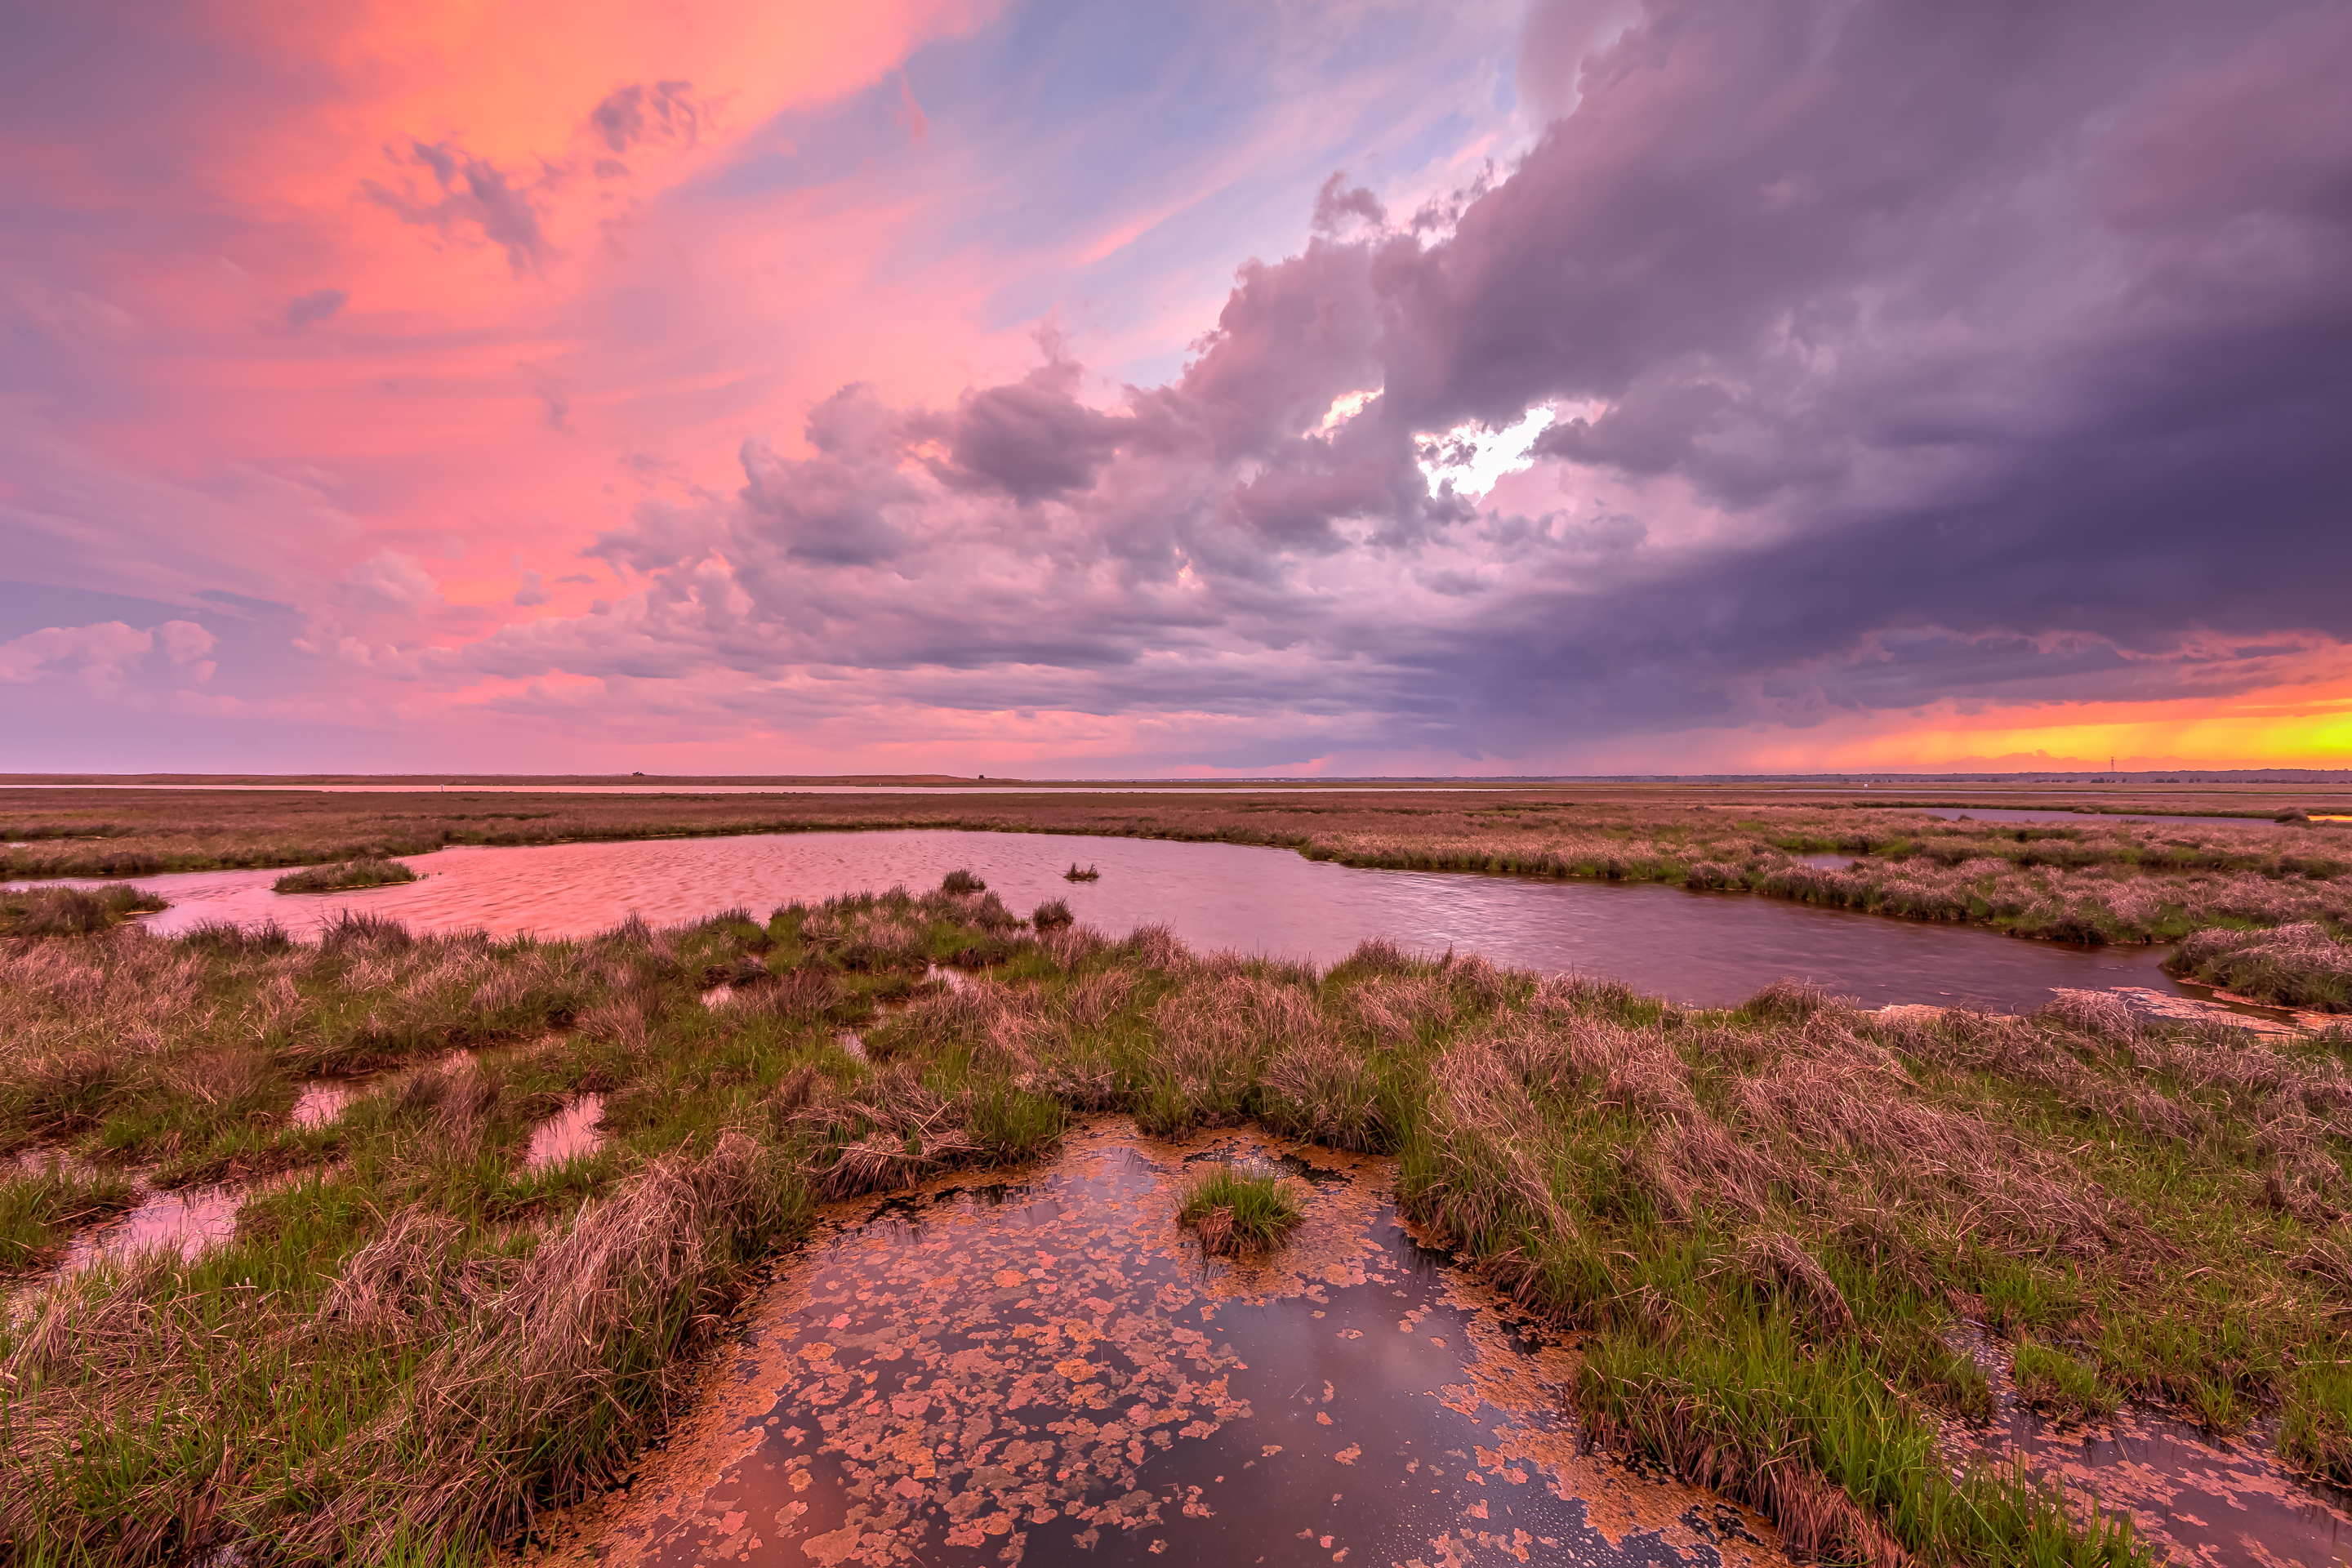 14mm sunset photograph over Cedar Run Dock Road salt marsh in mid May. The sky and clouds light up in pink pastel tones as storm clouds roll across the marsh from the western horizon.